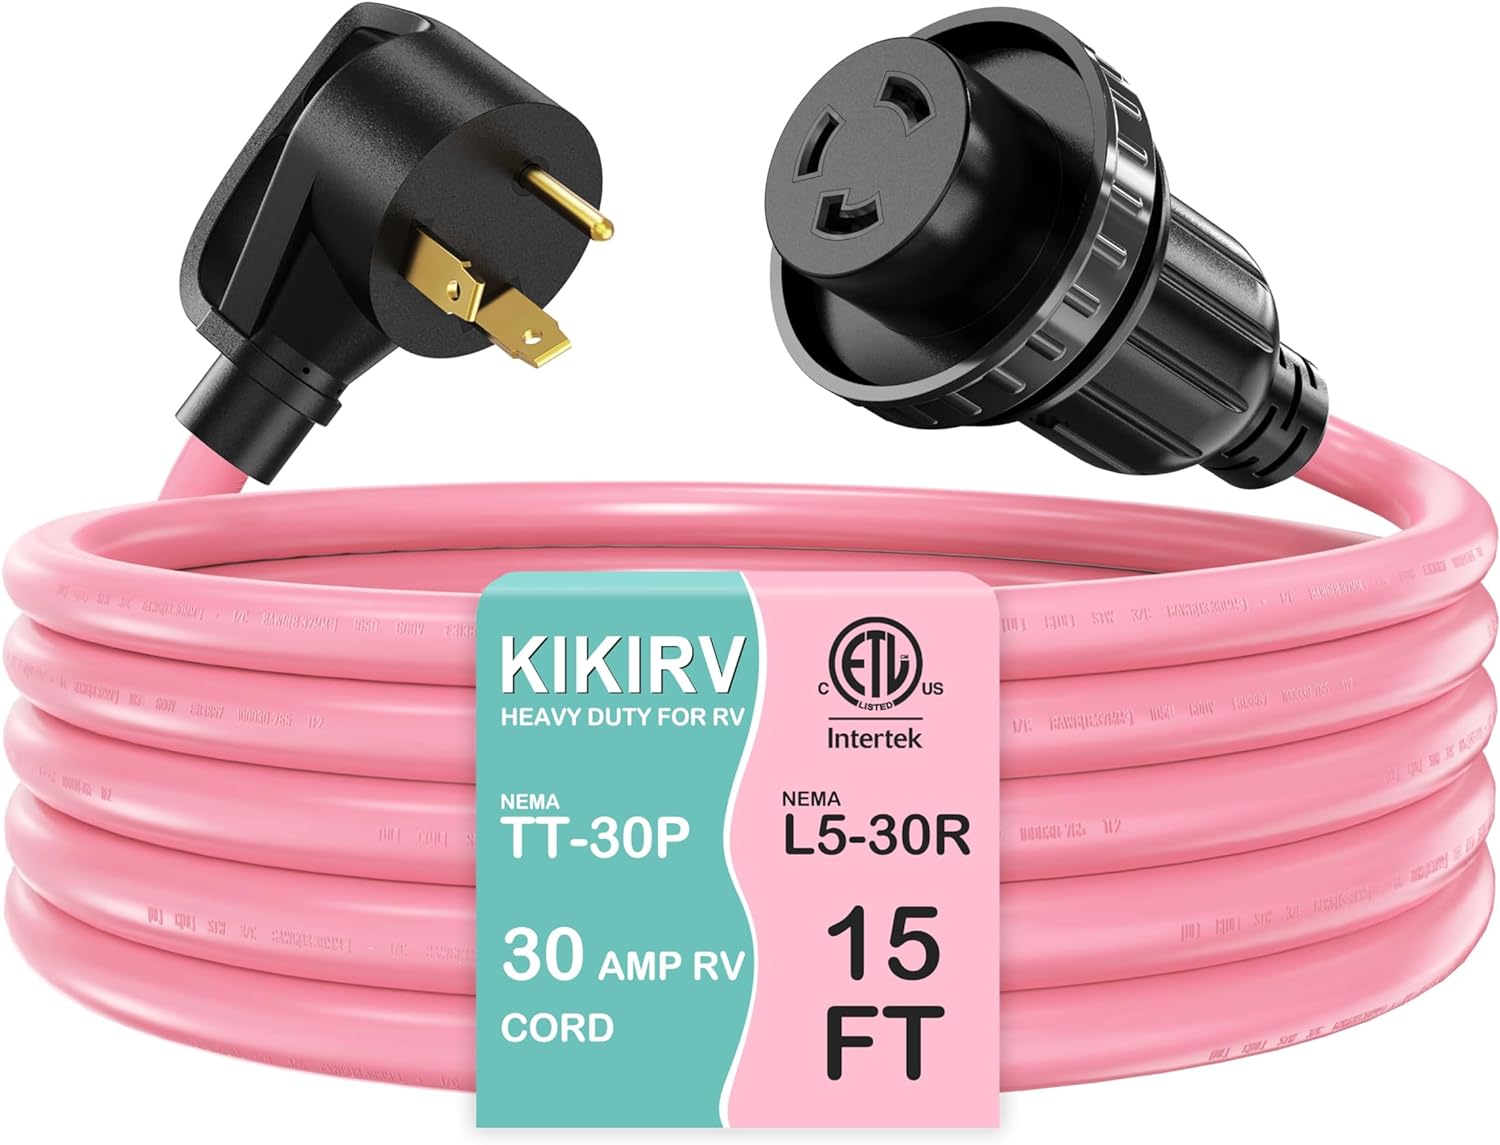 KIKIRV 50 Amp 50 Feet RV/Generator Cord with Locking Connector, Heavy Duty 50A Generator Cord, 14-50P Male and SS2-50R Twist Locking Female for RV Trailer Camper and Generator to House, UL Listed - KIKIRV 50 Amp RV/Generator Cord Review